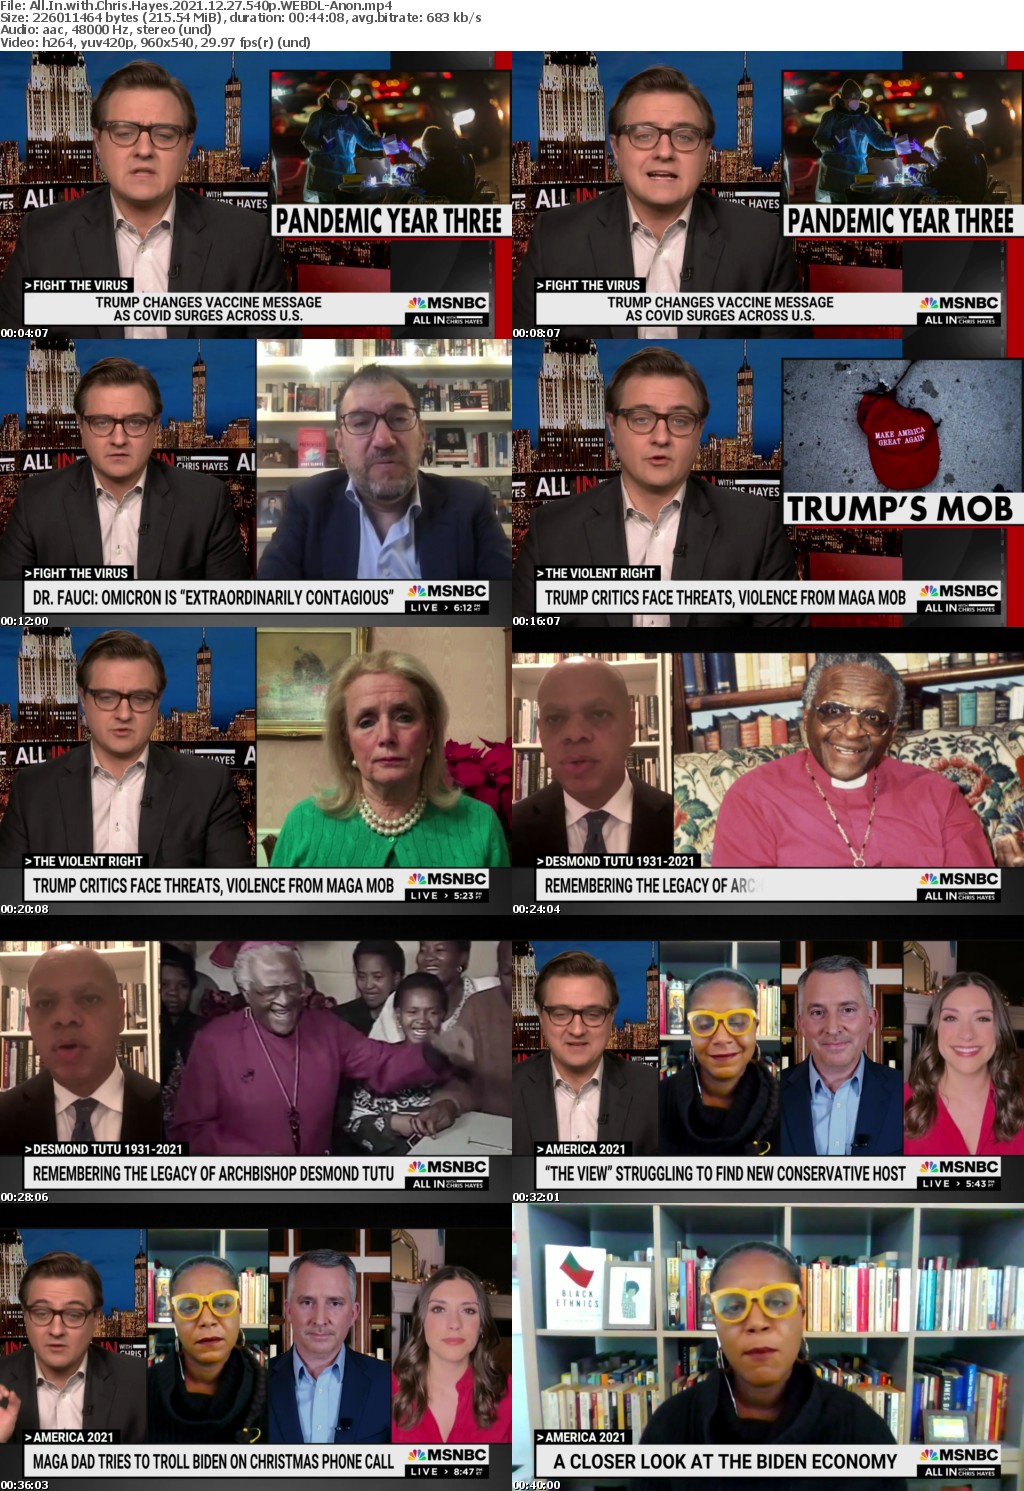 All In with Chris Hayes 2021 12 27 540p WEBDL-Anon